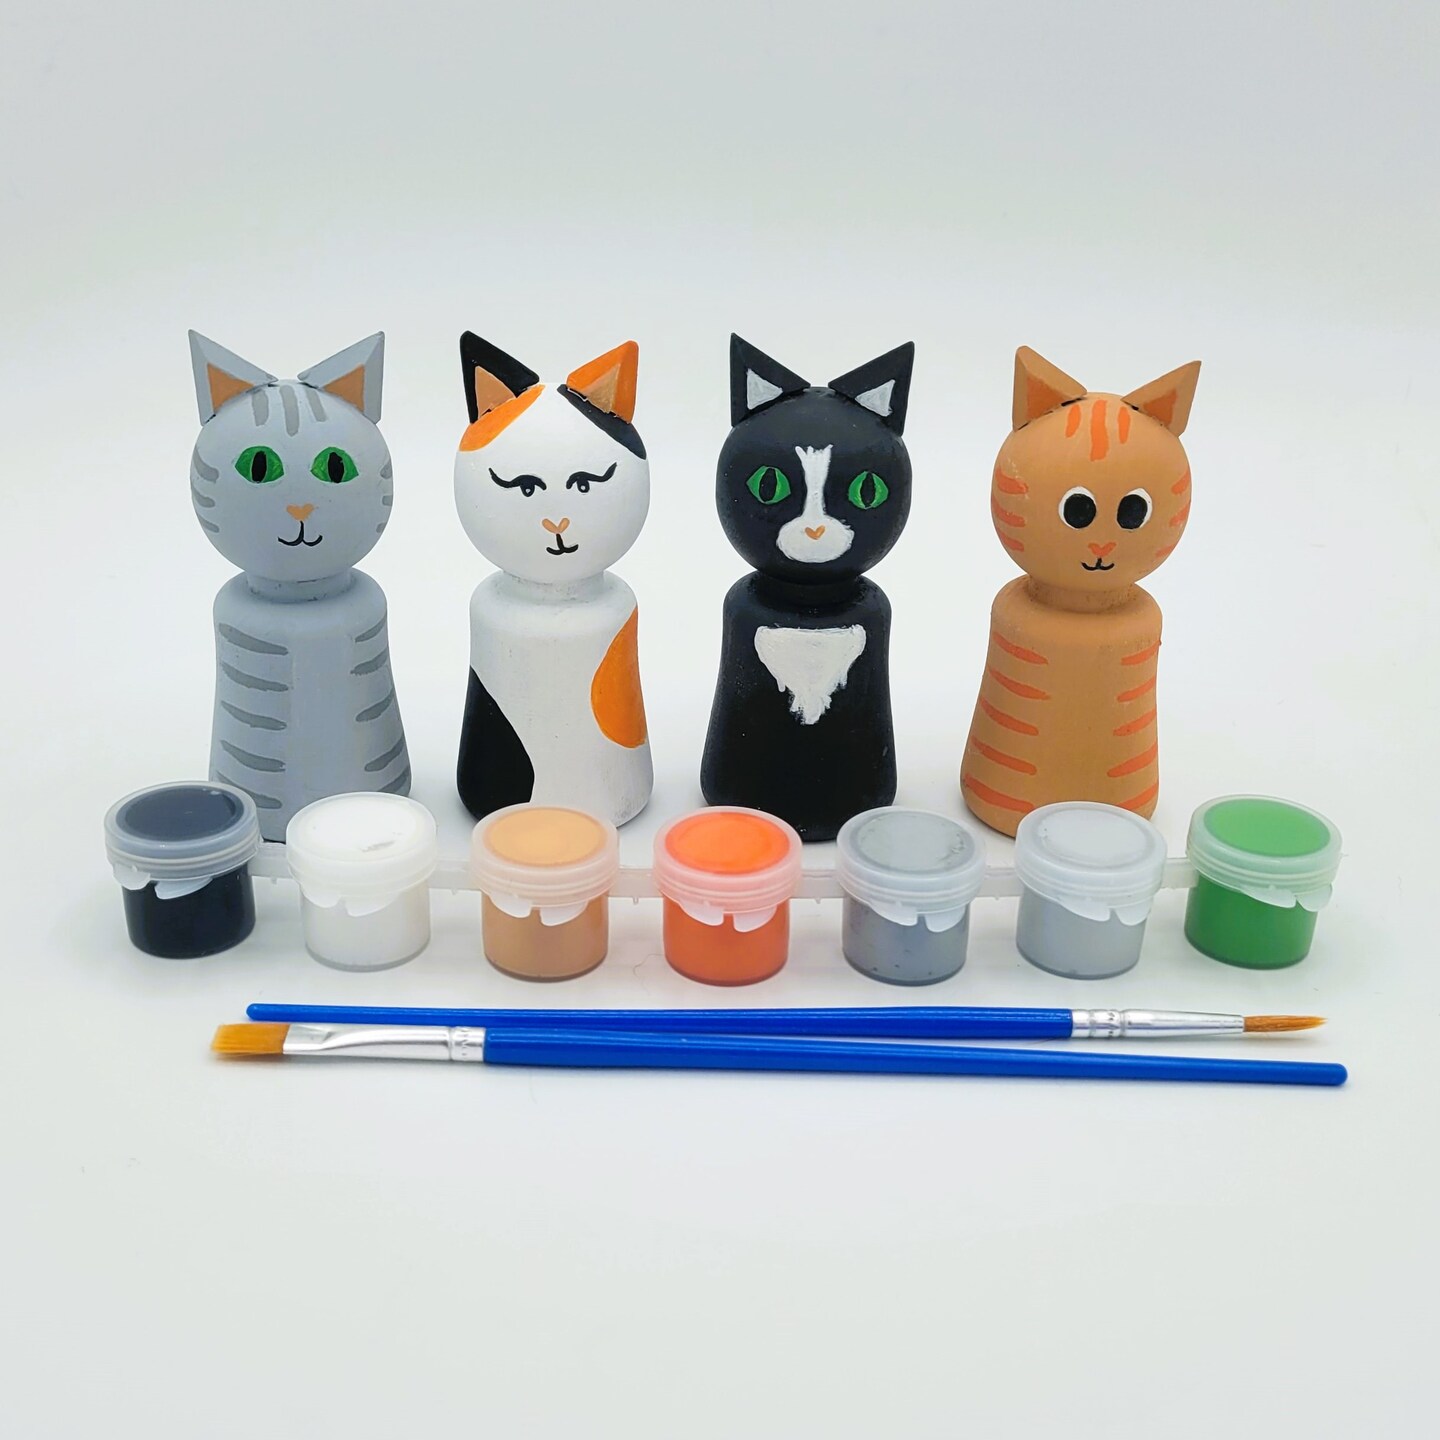 DIY Cat Peg Doll Painting Kit by Ink and Trinket Kids